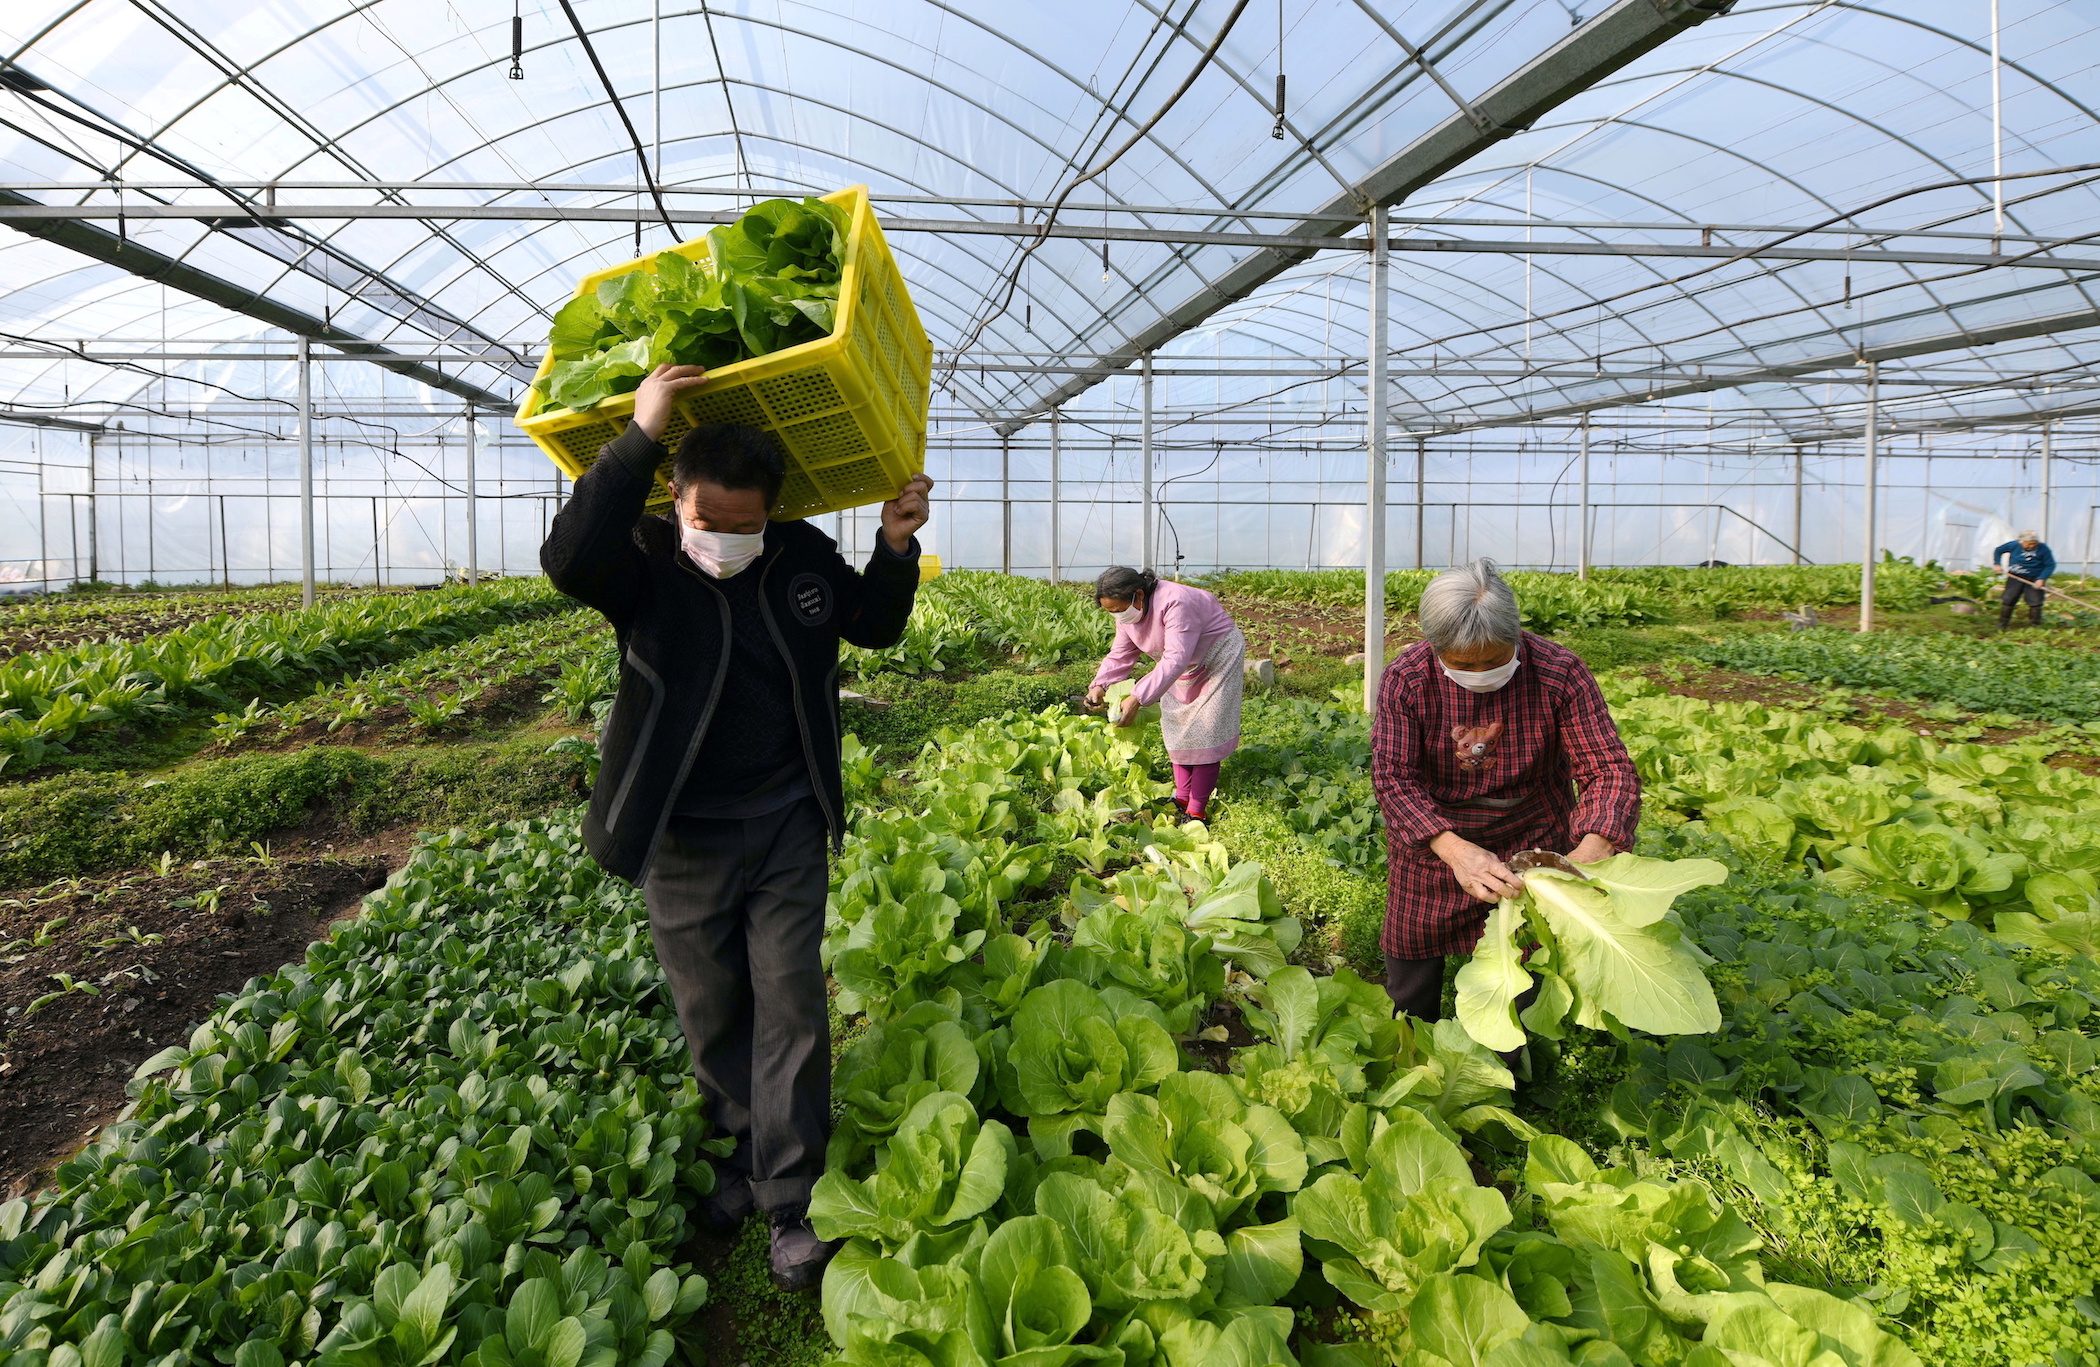 Don’t worry, China has plenty of vegetables and grain, farm officials say